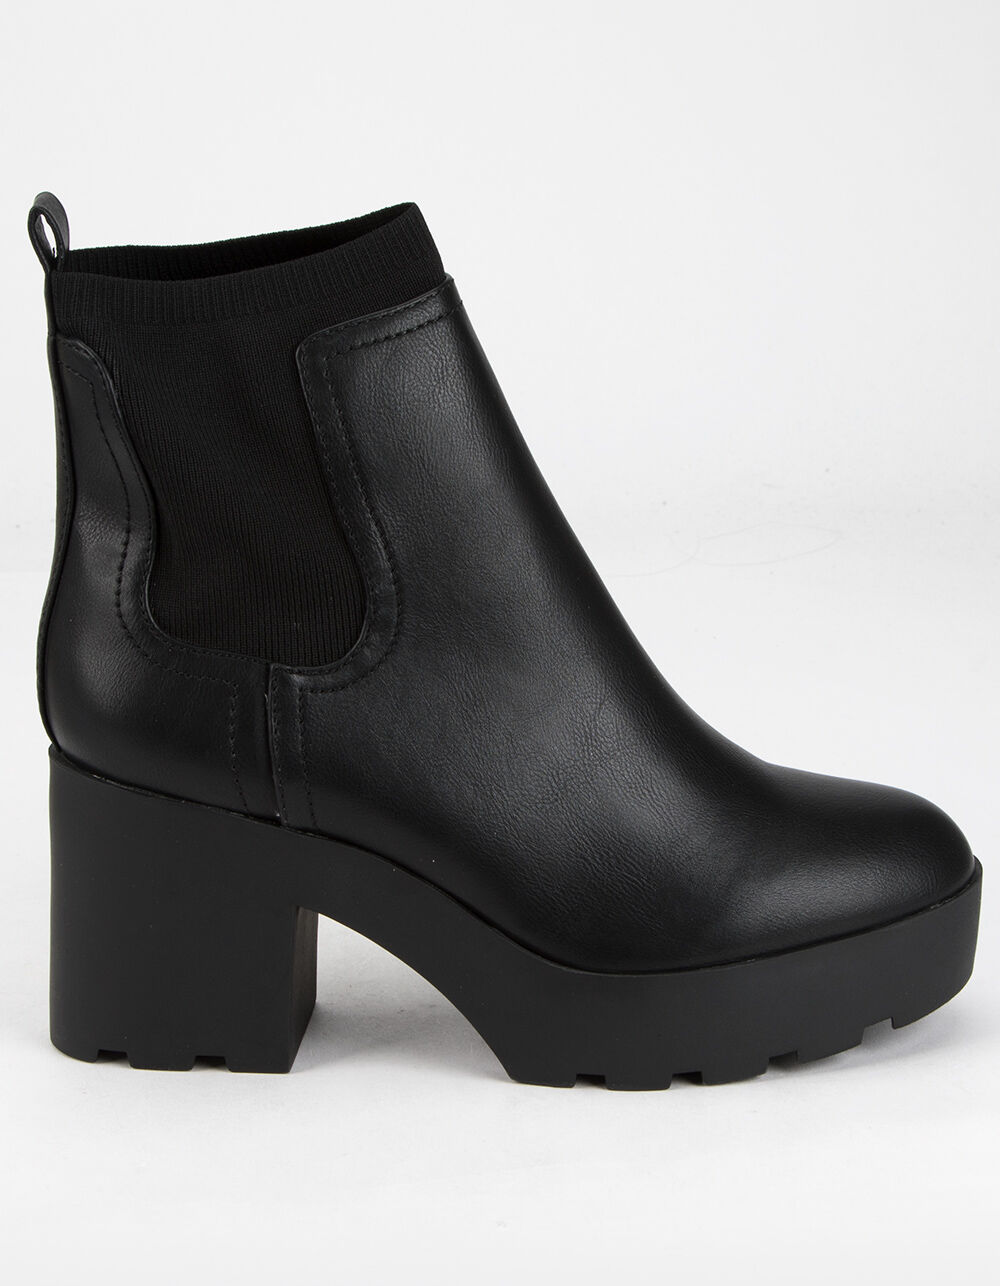 BAMBOO Lug Sole Stretch Womens Chelsea Boot - BLACK | Tillys